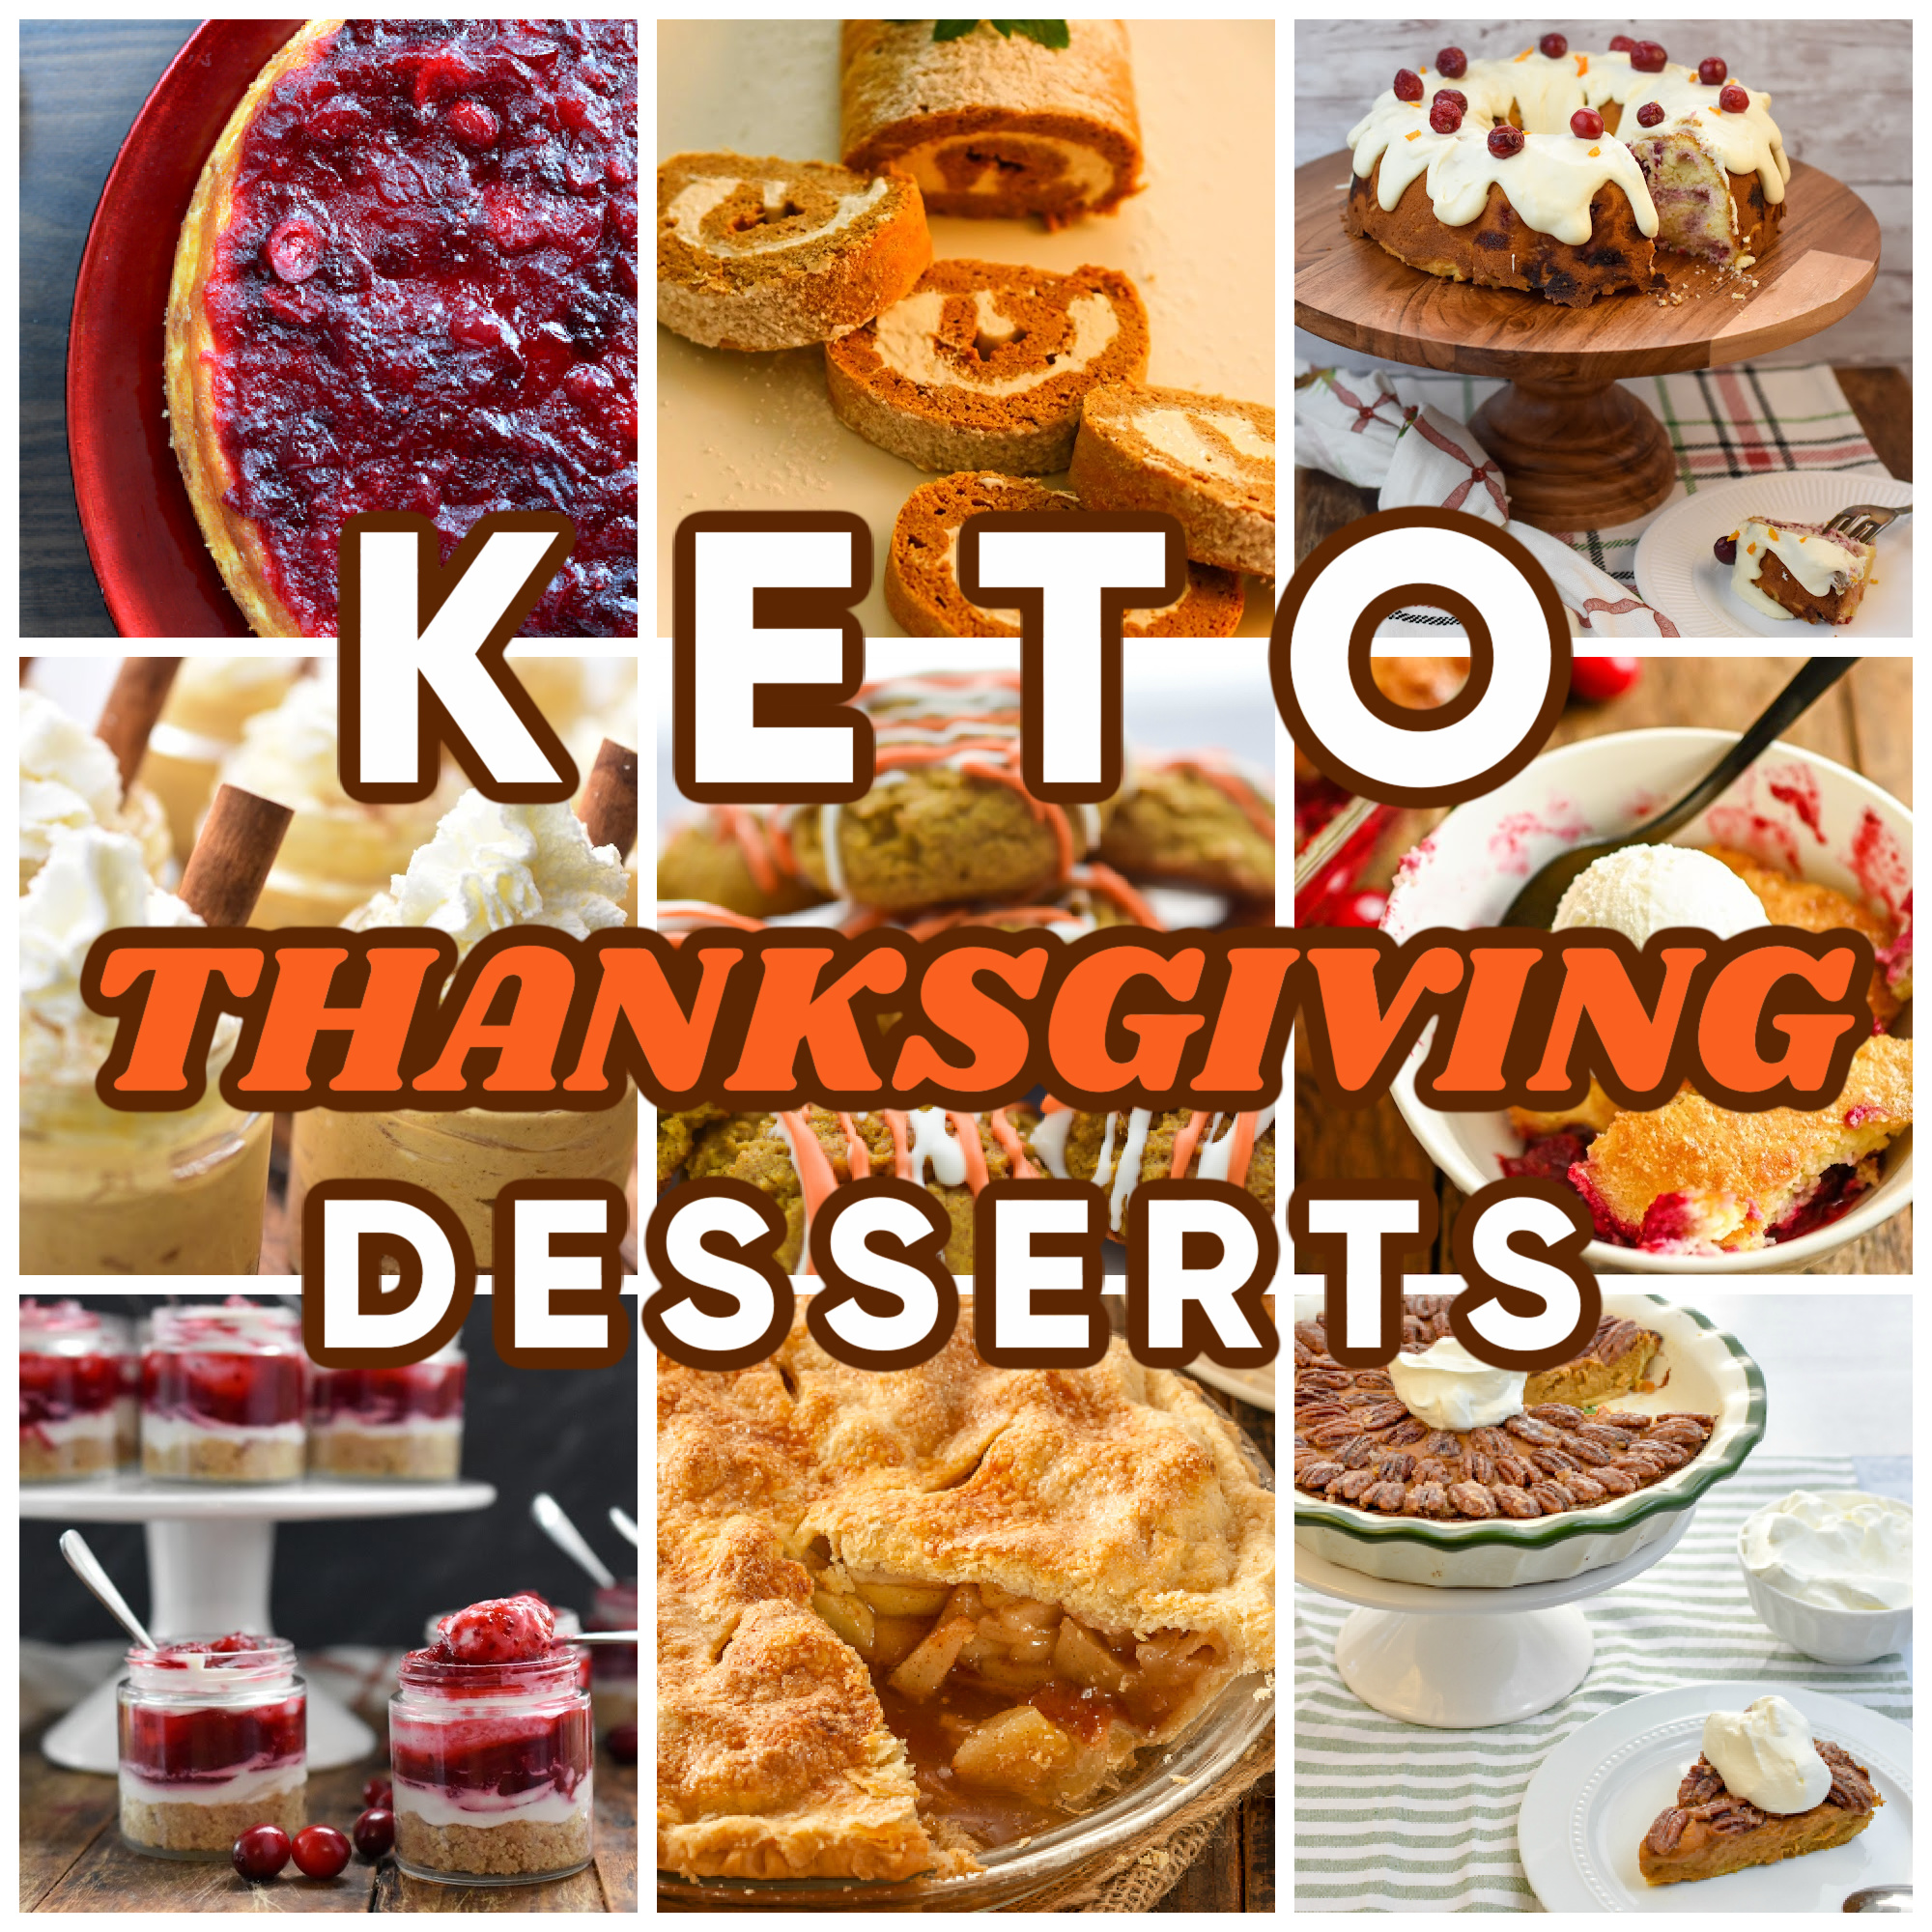 Keto Thanksgiving Desserts Featured Image Collage  